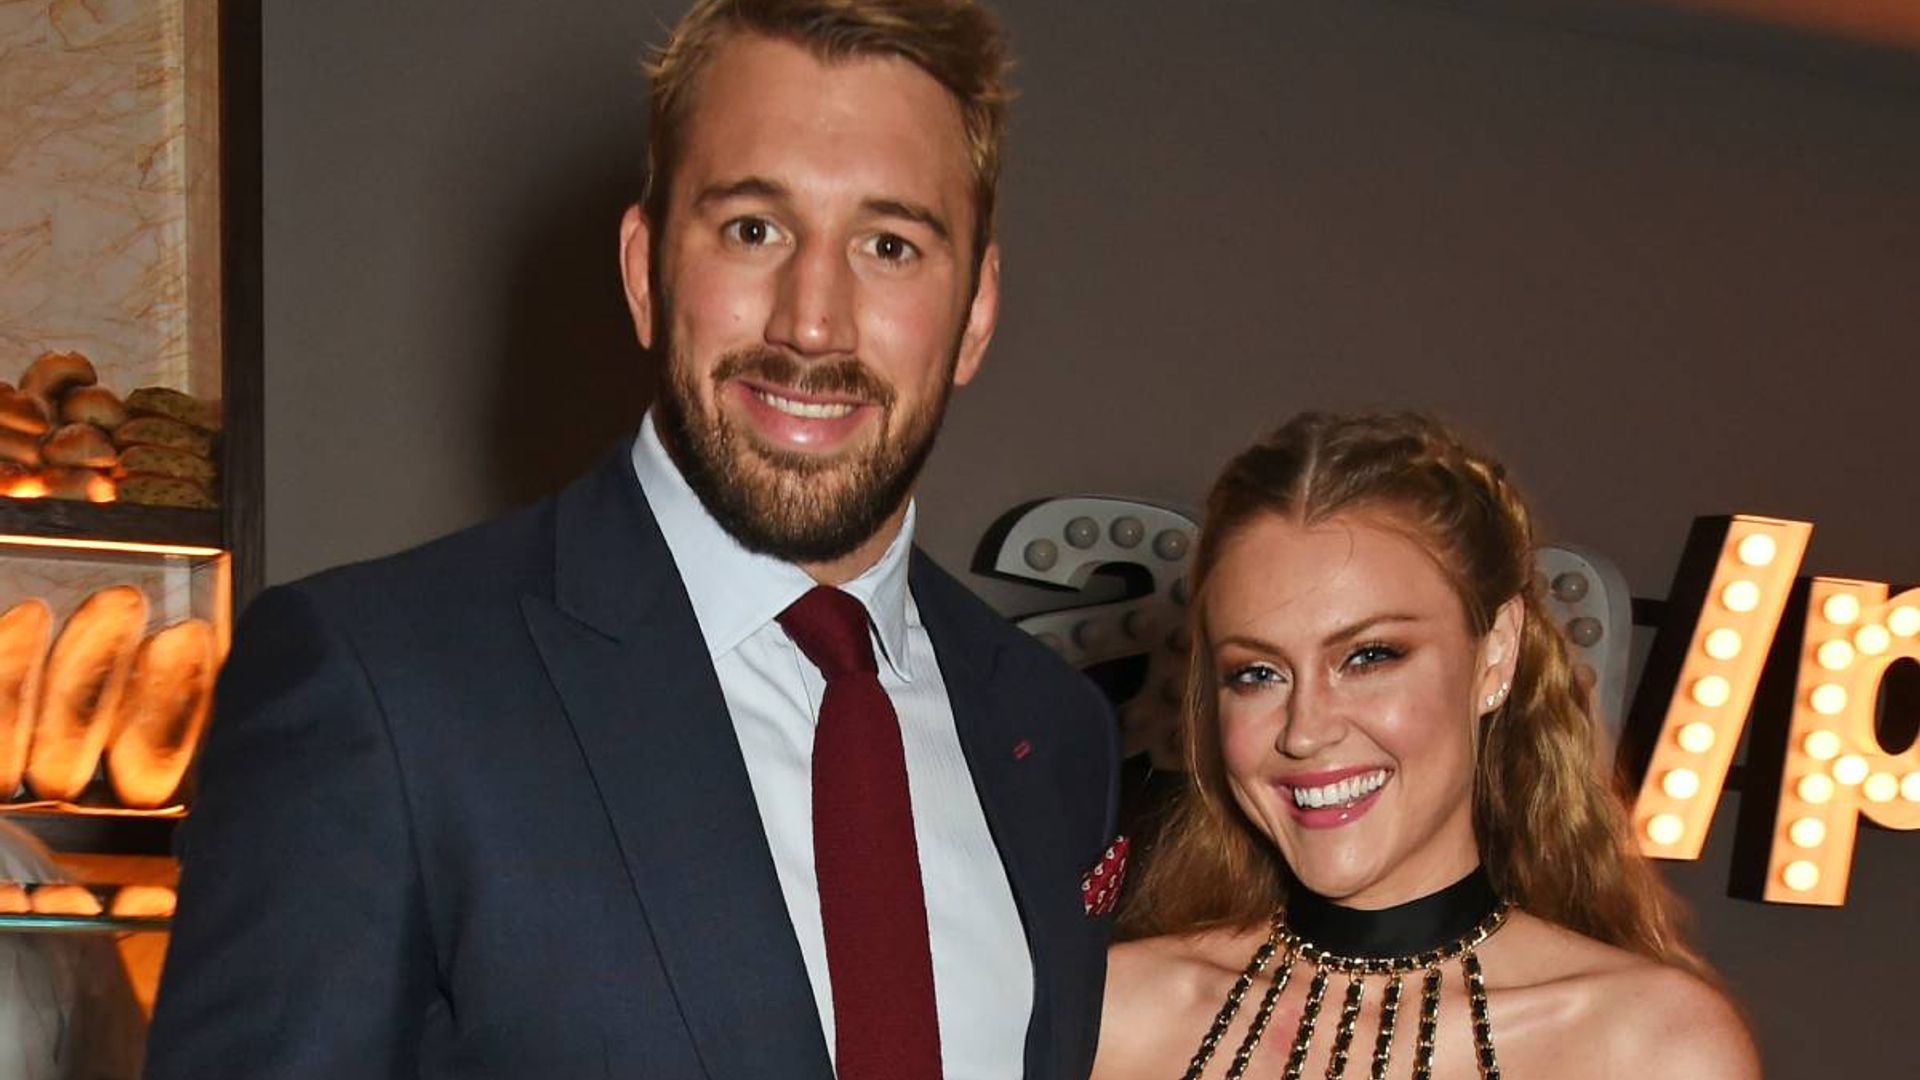 Exclusive: Camilla Kerslake and Chris Robshaw welcome first child together - see photo